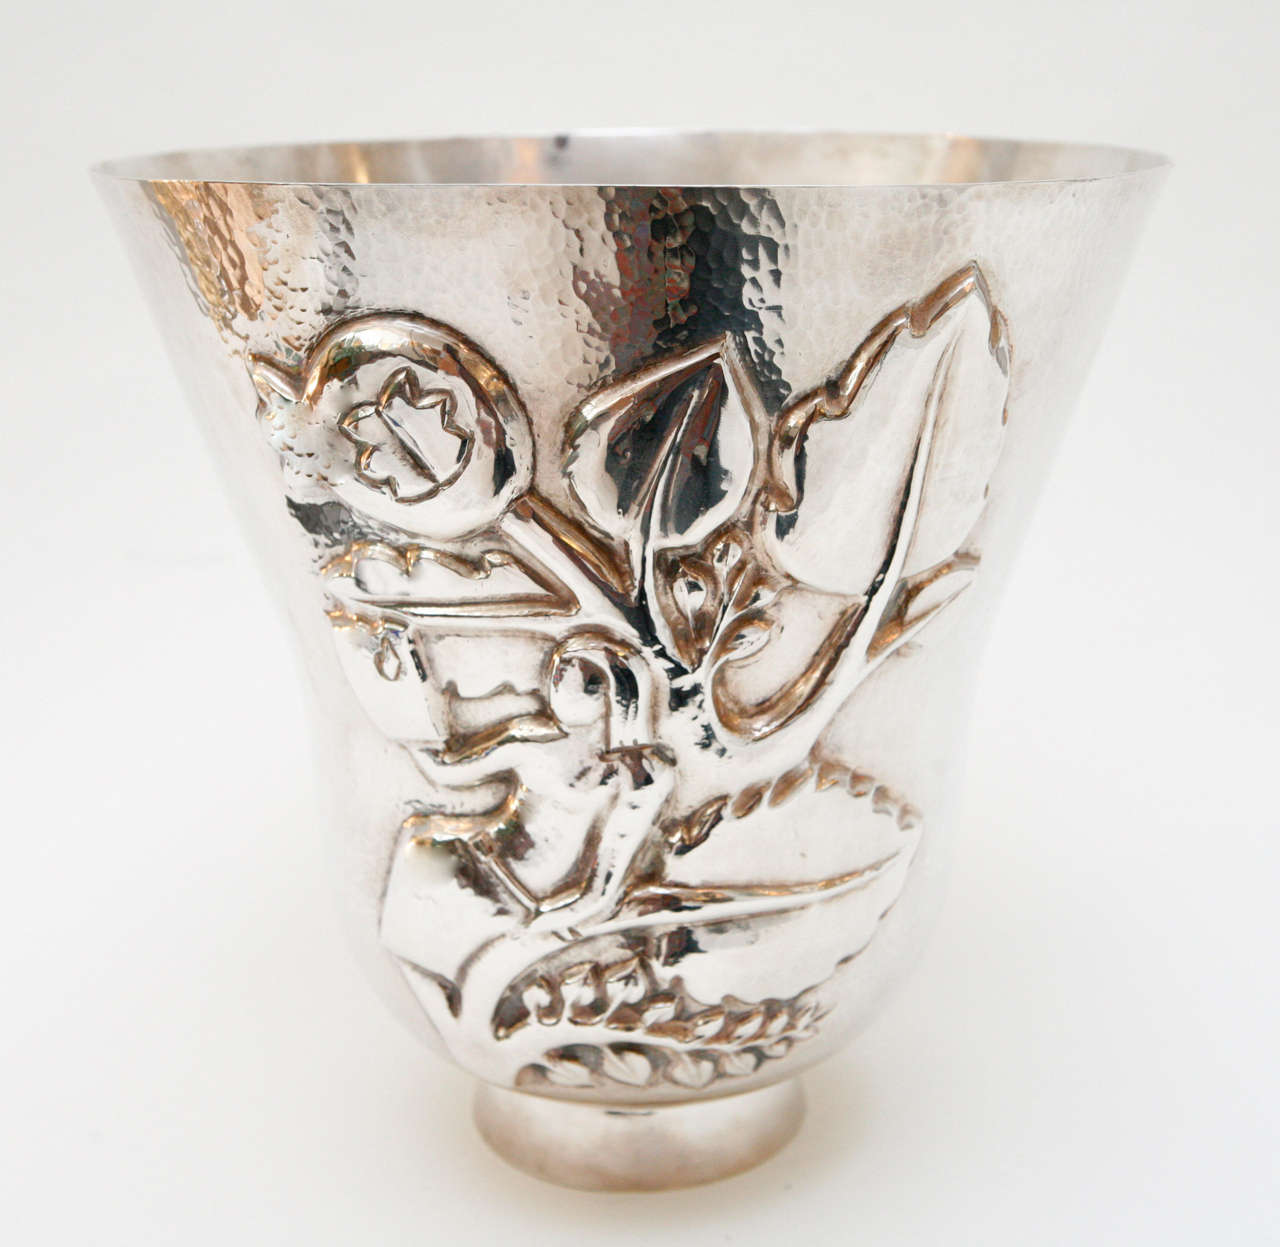 A striking, large silver plate Italian vase with hammered finish and a stylized botanical design and woman in relief on the front. Stamped at the side rim of the vase 